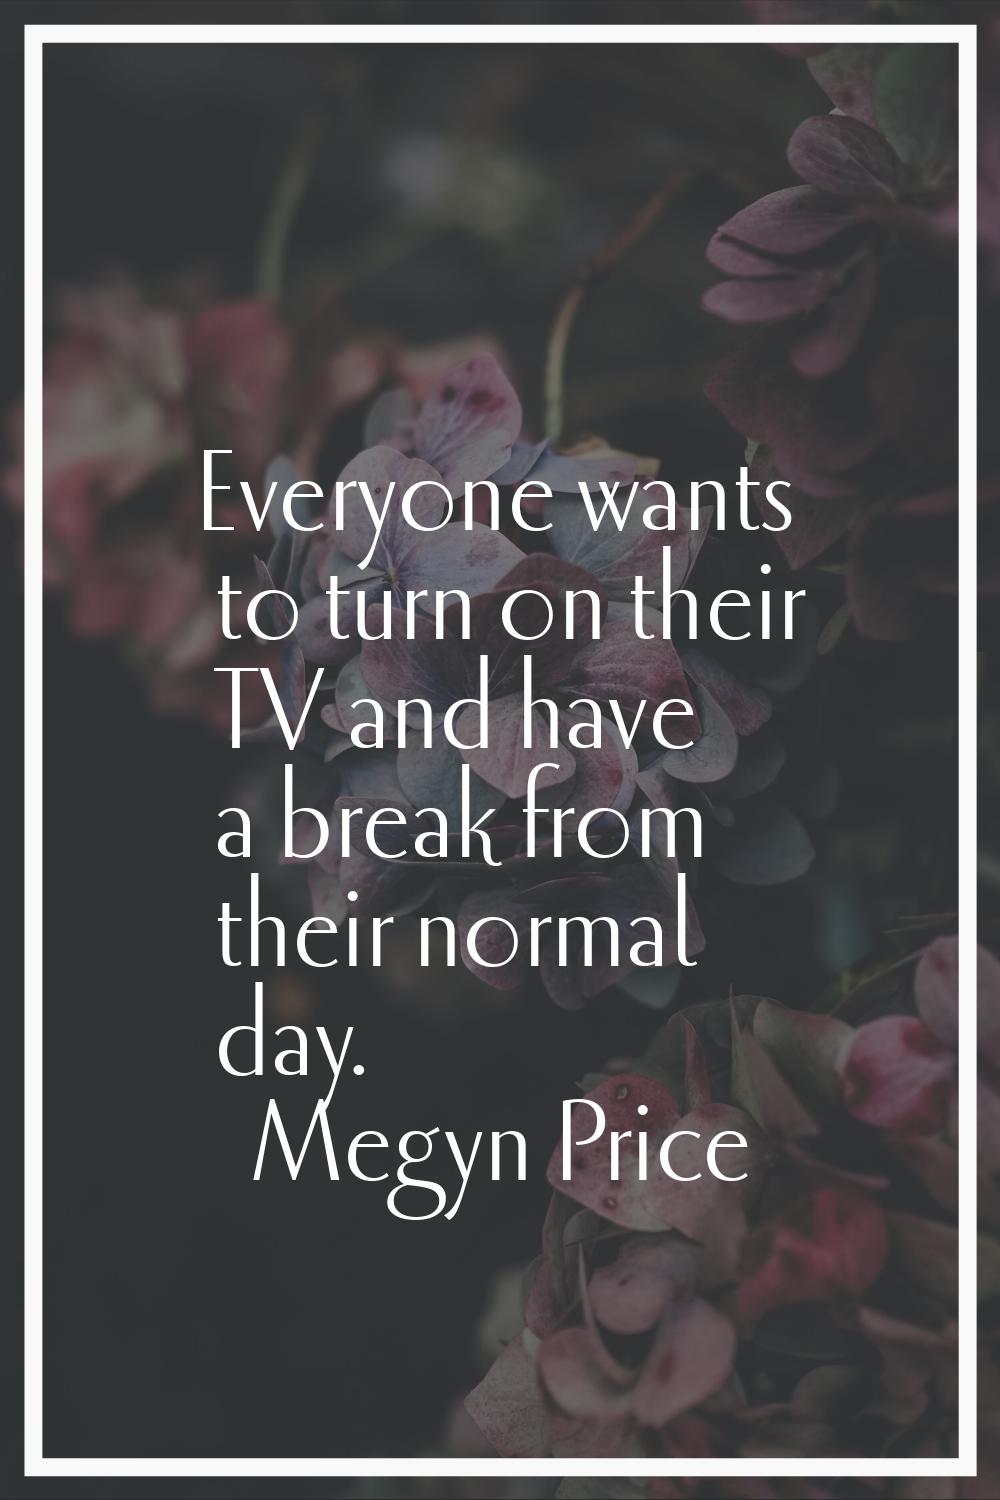 Everyone wants to turn on their TV and have a break from their normal day.